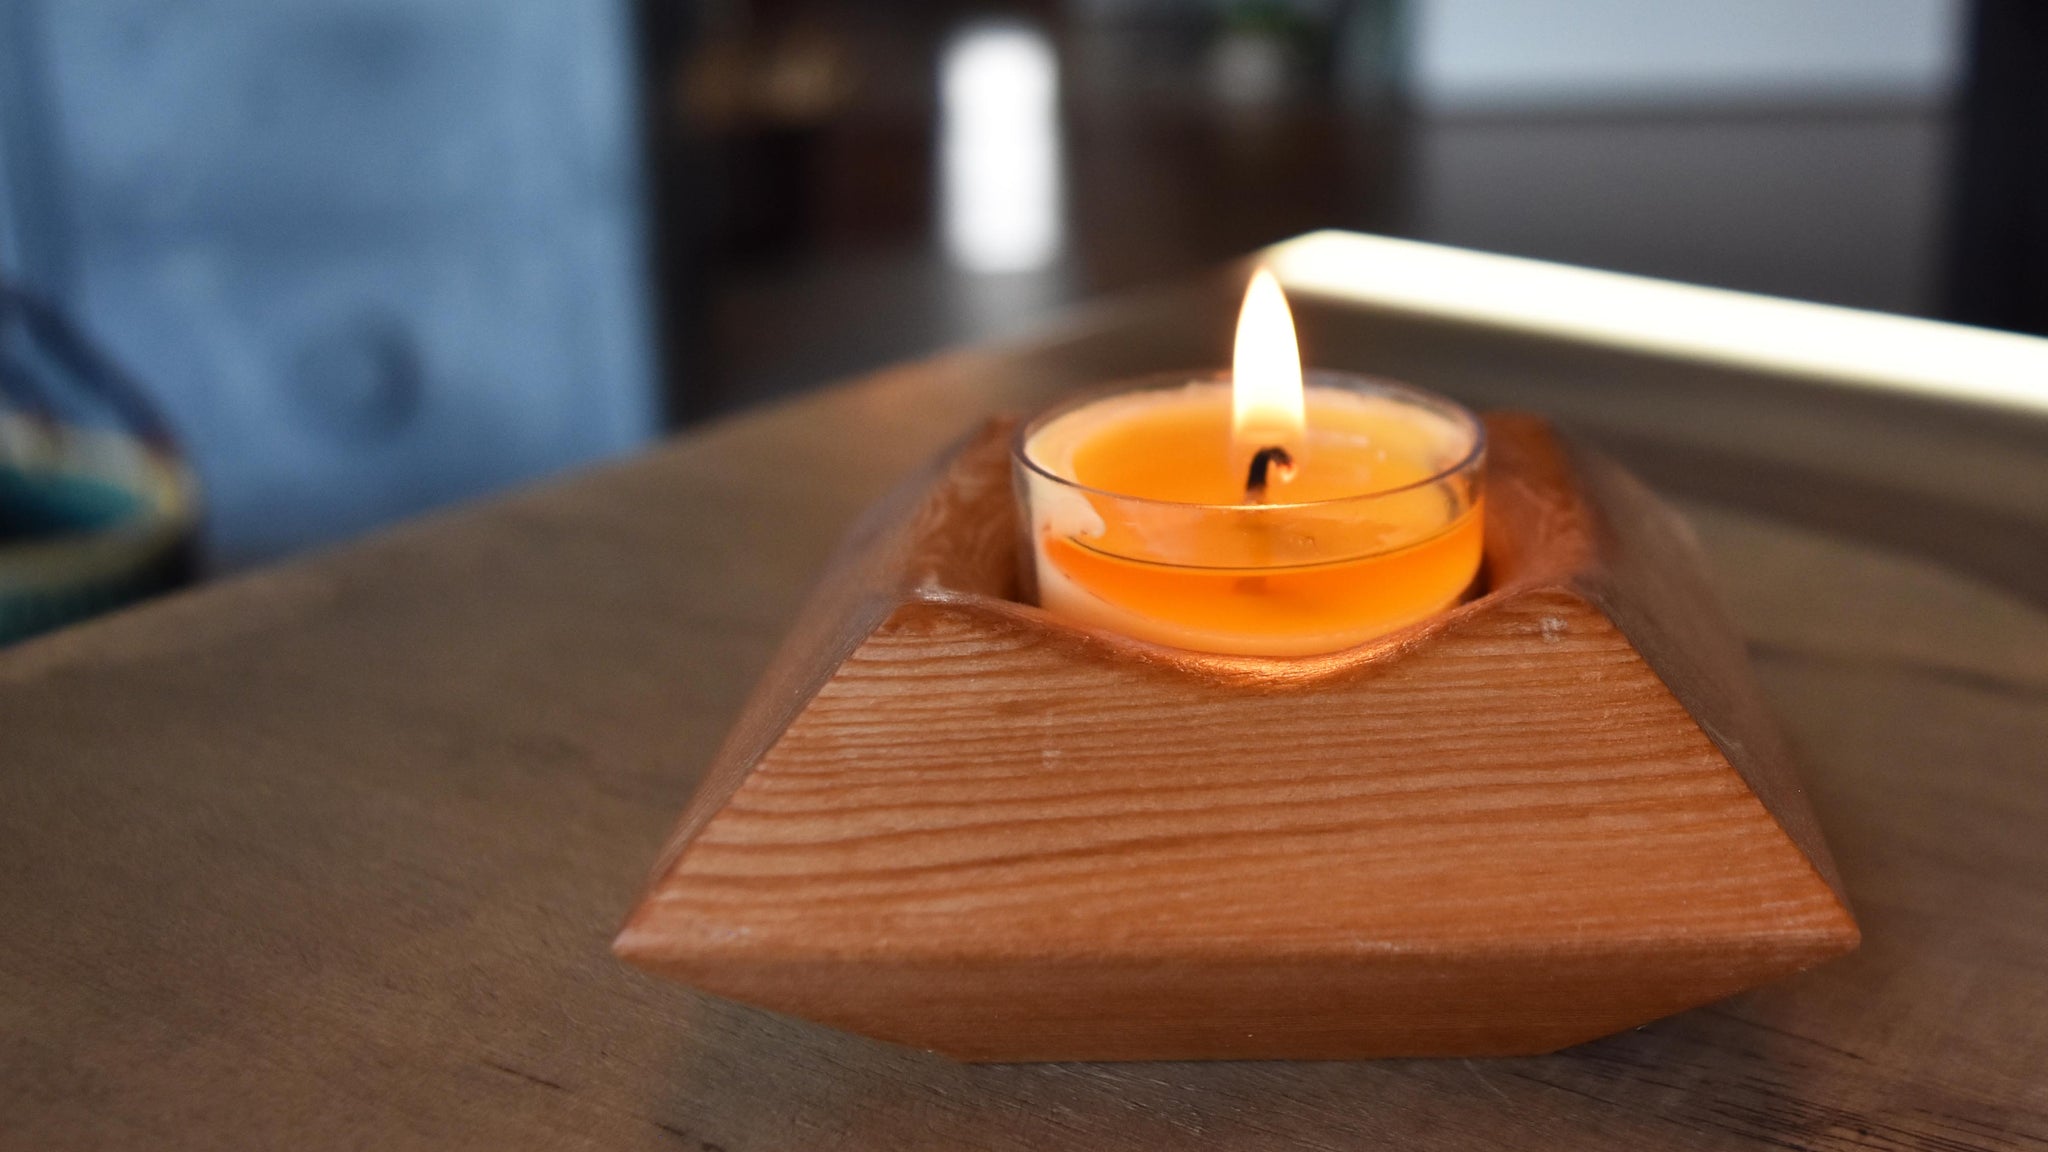 Temperature Affects Candle Burn Time and Wax Consumption